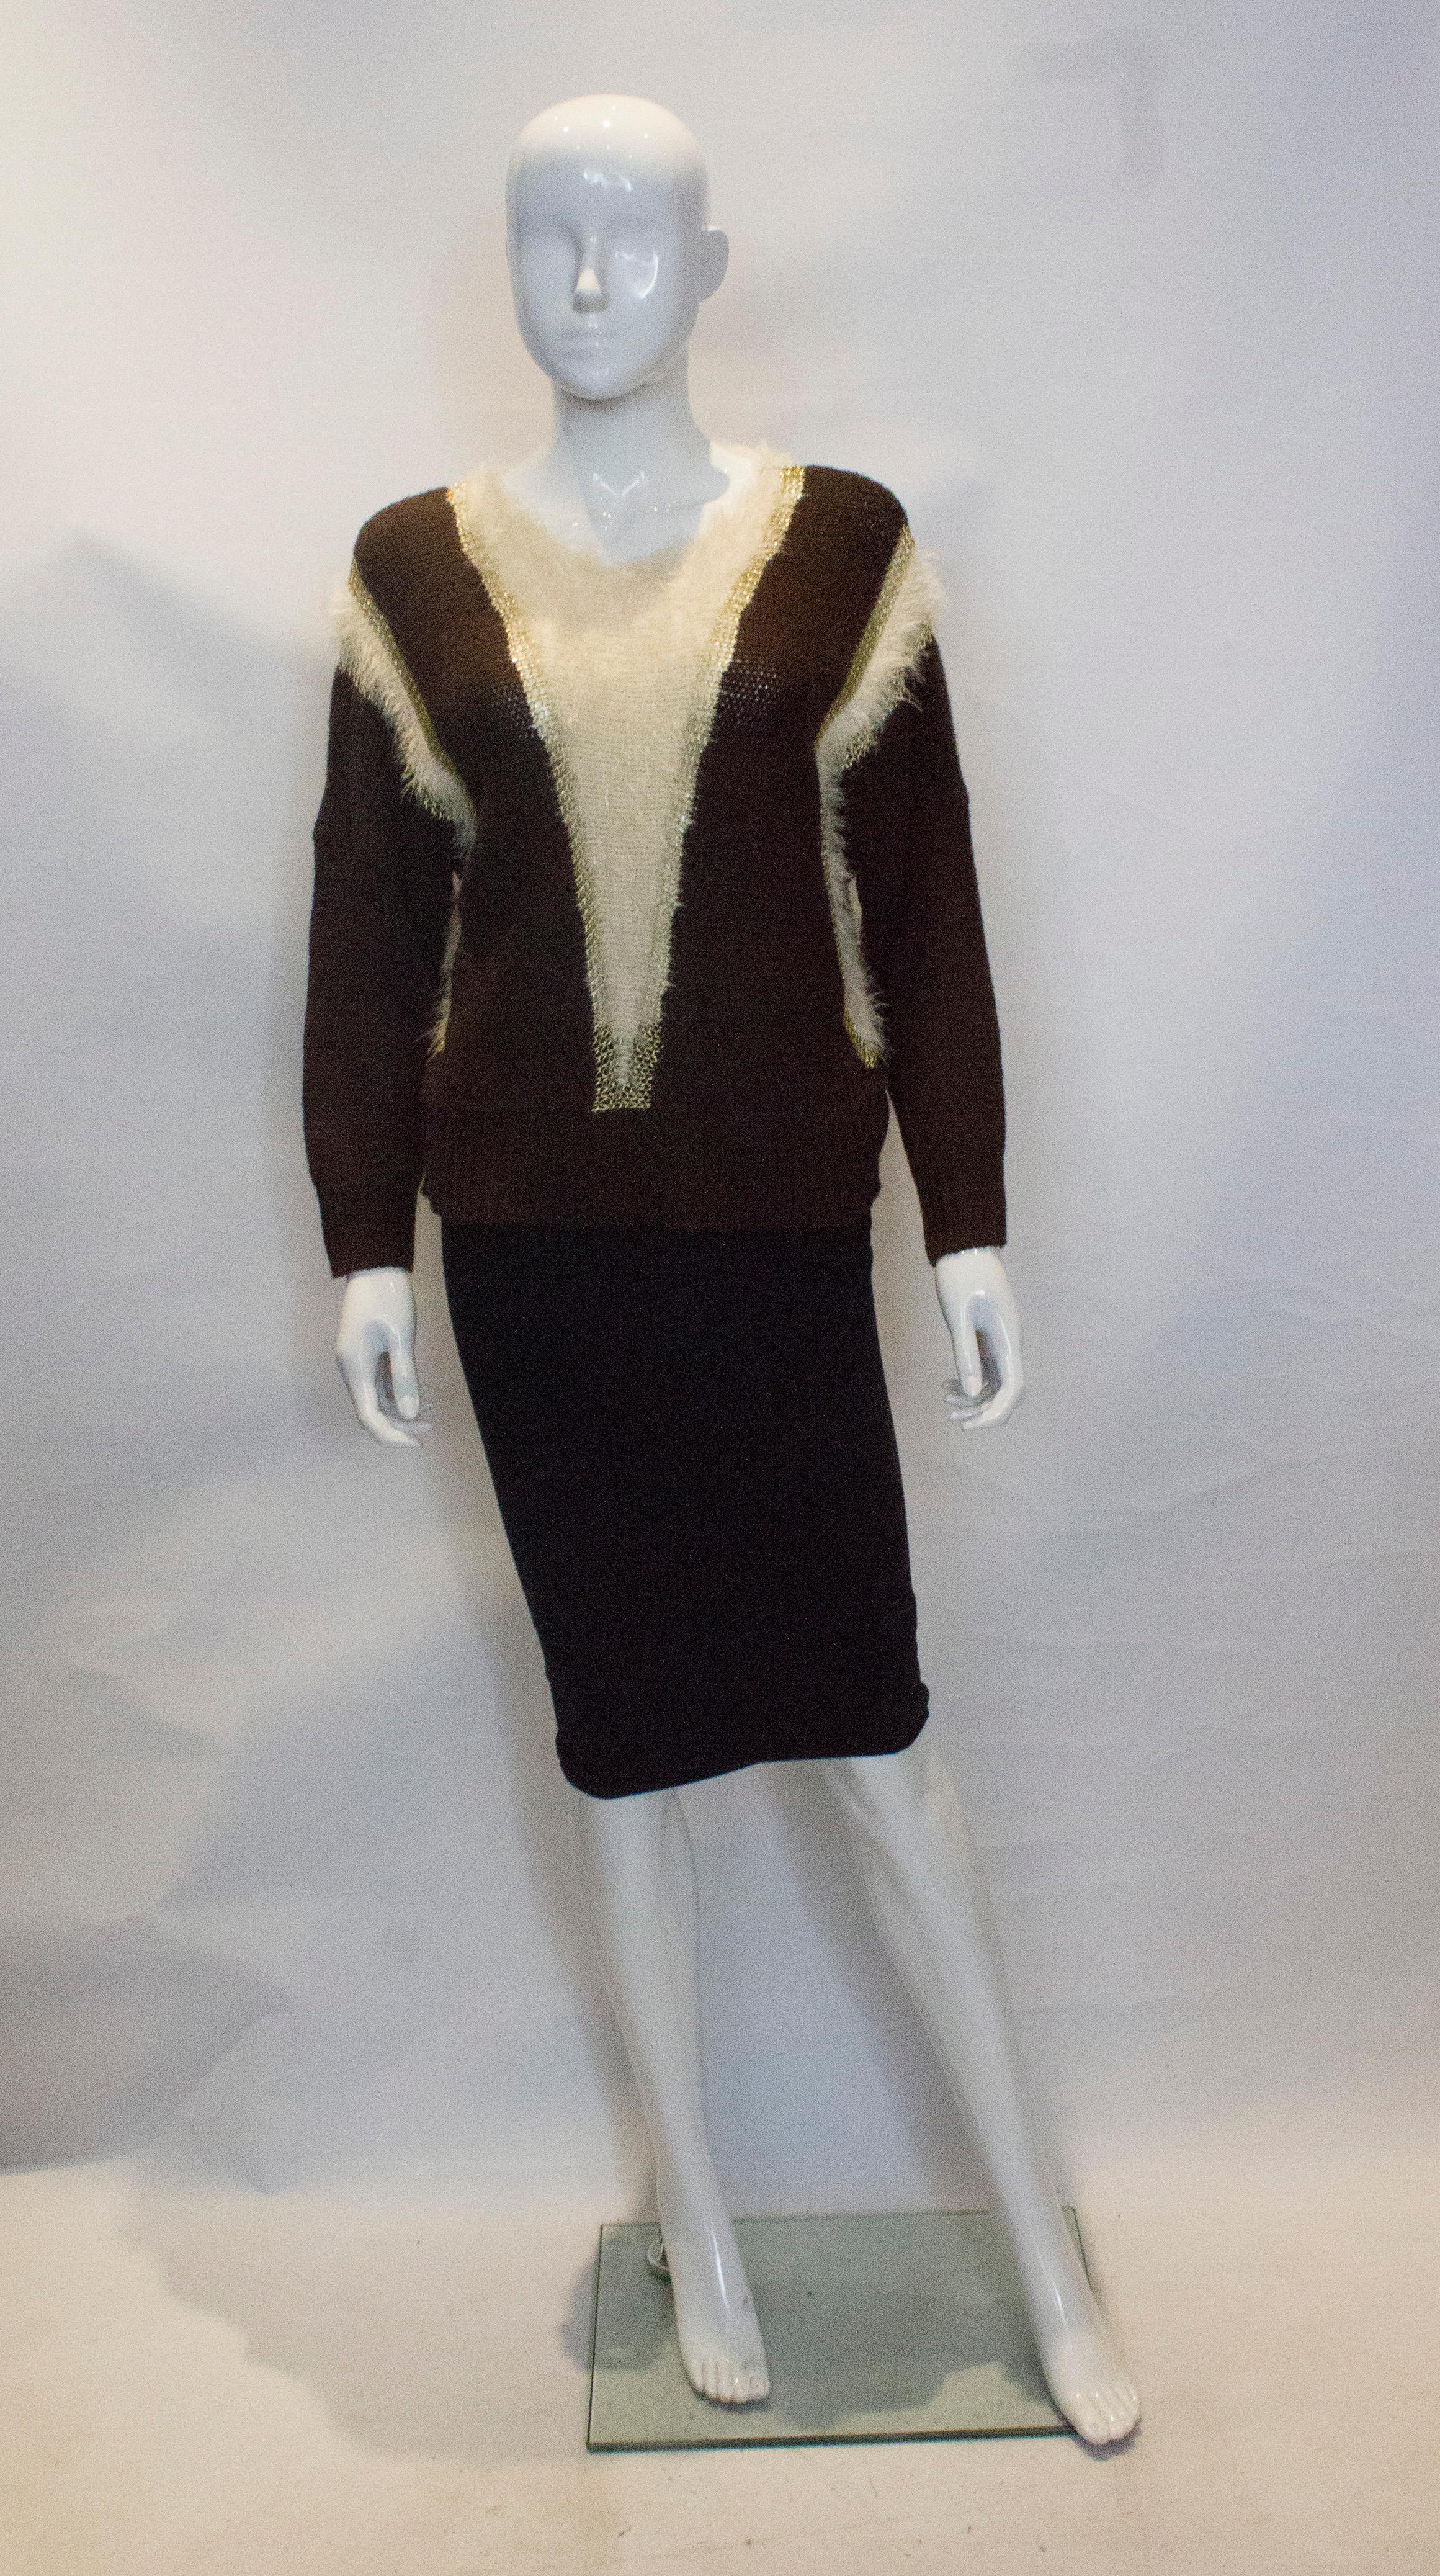 A great jumper for Fall. The jumper has a round neckline with drop shoulders. It has vertical lines of gold that lengthen the body and white knitted areas.